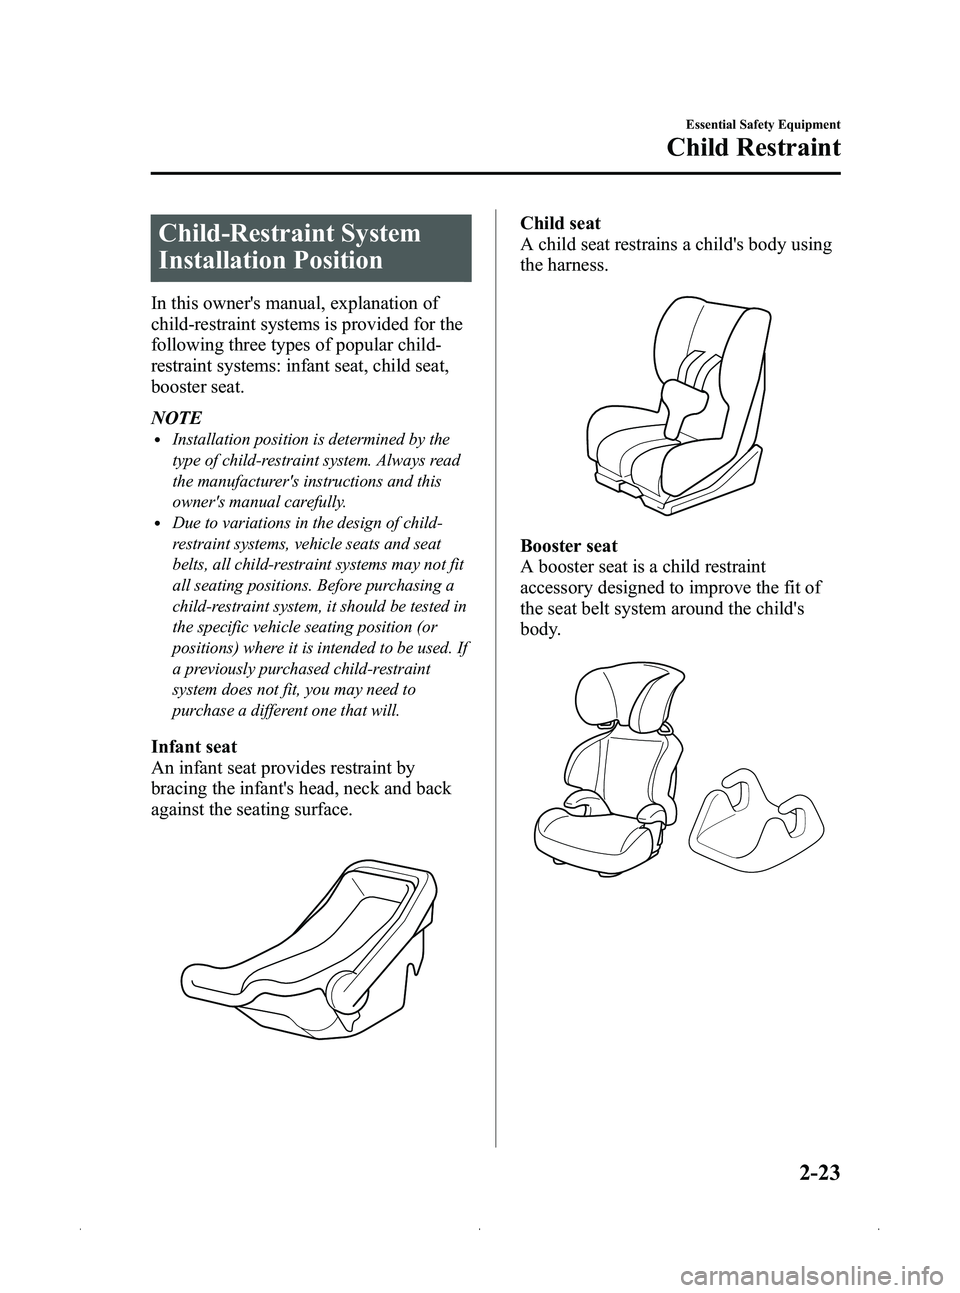 MAZDA MODEL MX-5 MIATA 2012 Owners Guide Black plate (35,1)
Child-Restraint System
Installation Position
In this owners manual, explanation of
child-restraint systems is provided for the
following three types of popular child-
restraint sys